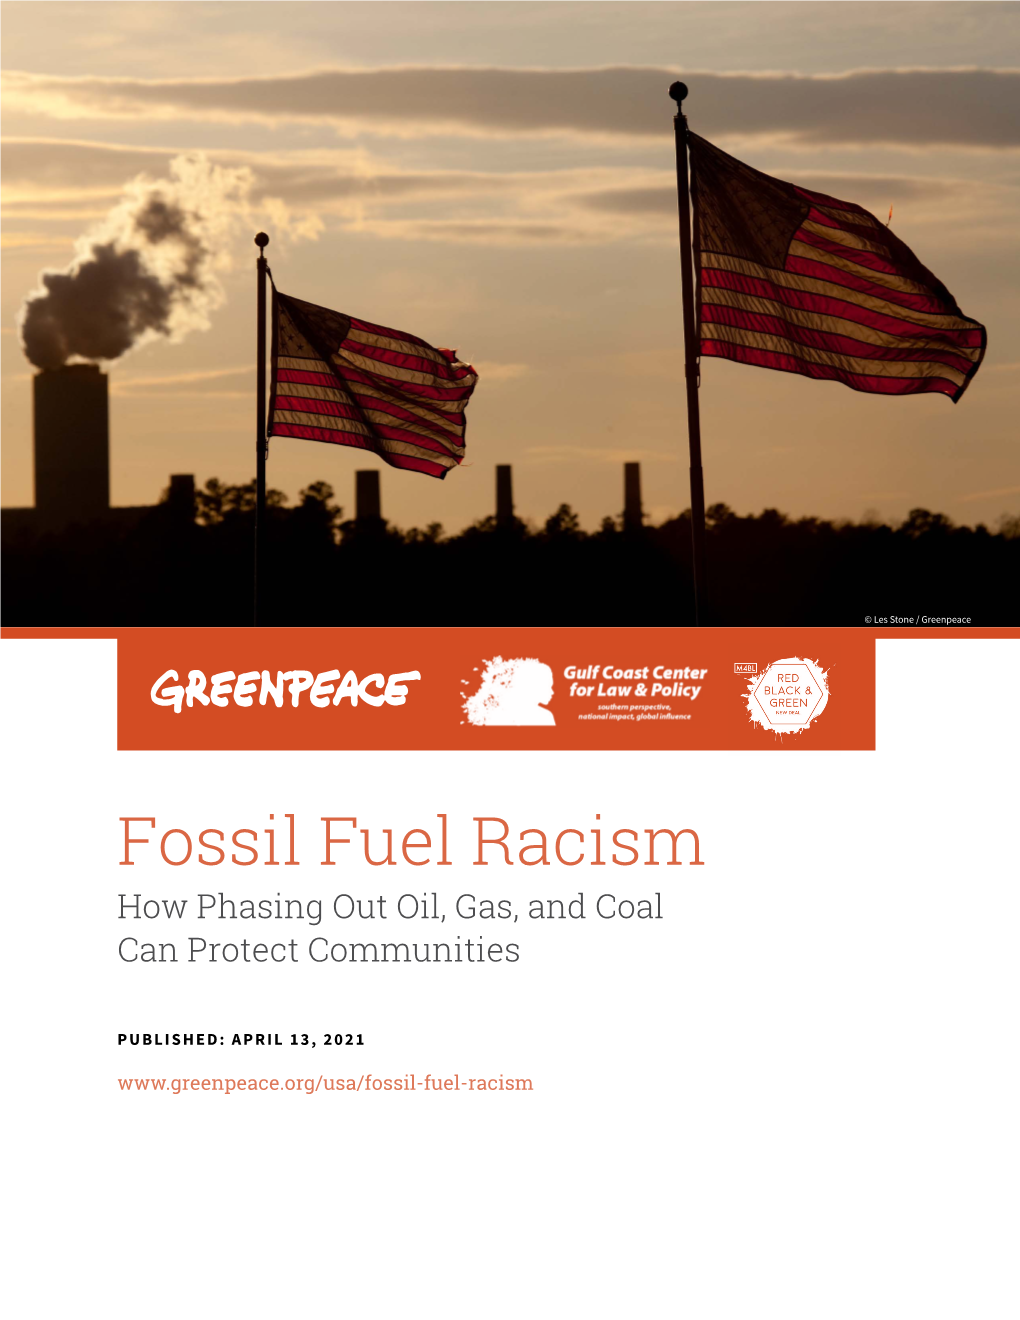 Fossil Fuel Racism How Phasing out Oil, Gas, and Coal Can Protect Communities